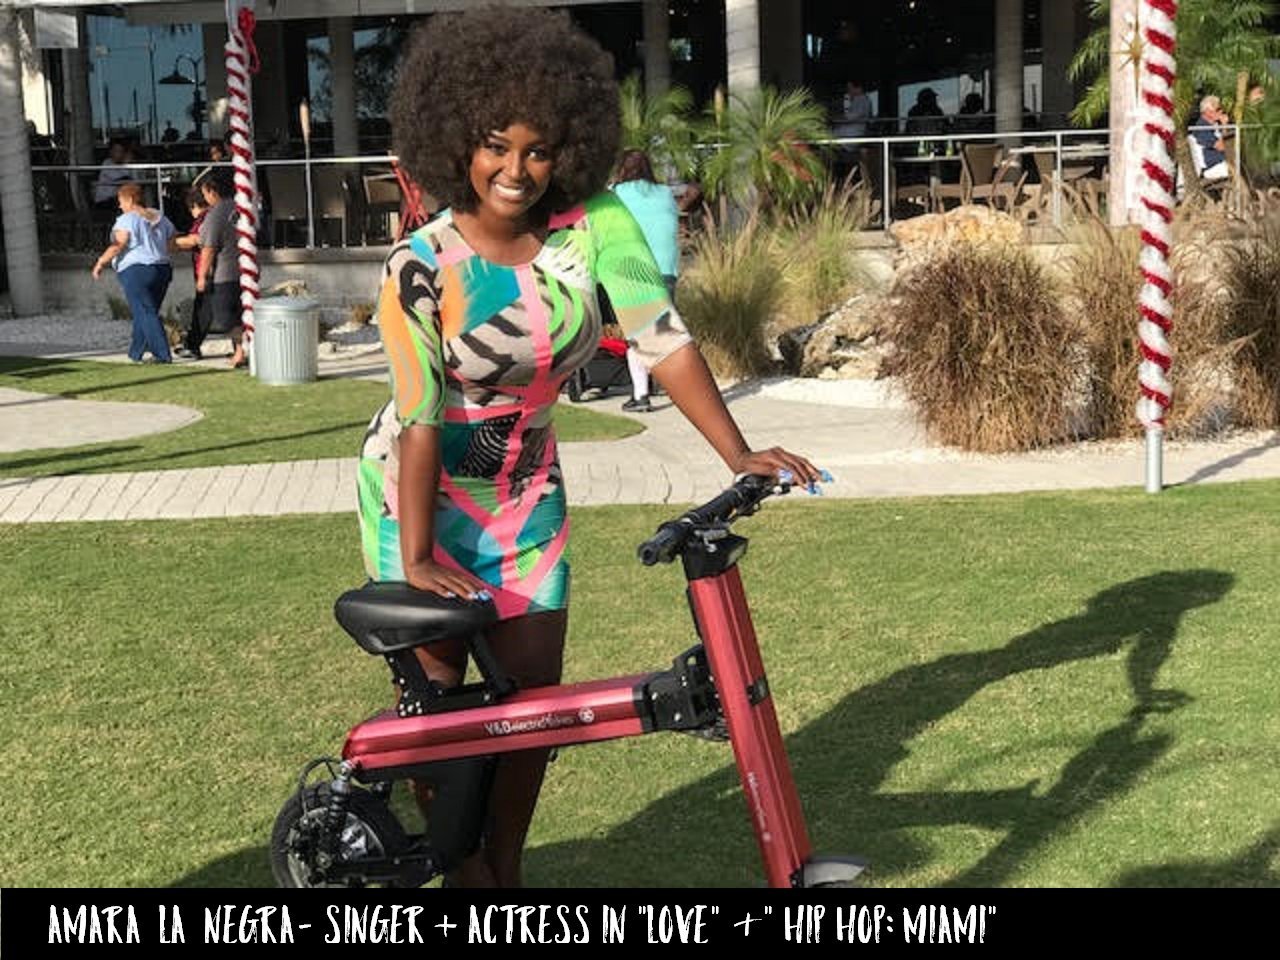 Actress and singer from Love & Hip Hop Amara La Negra is promoting the Red Go-Bike M2